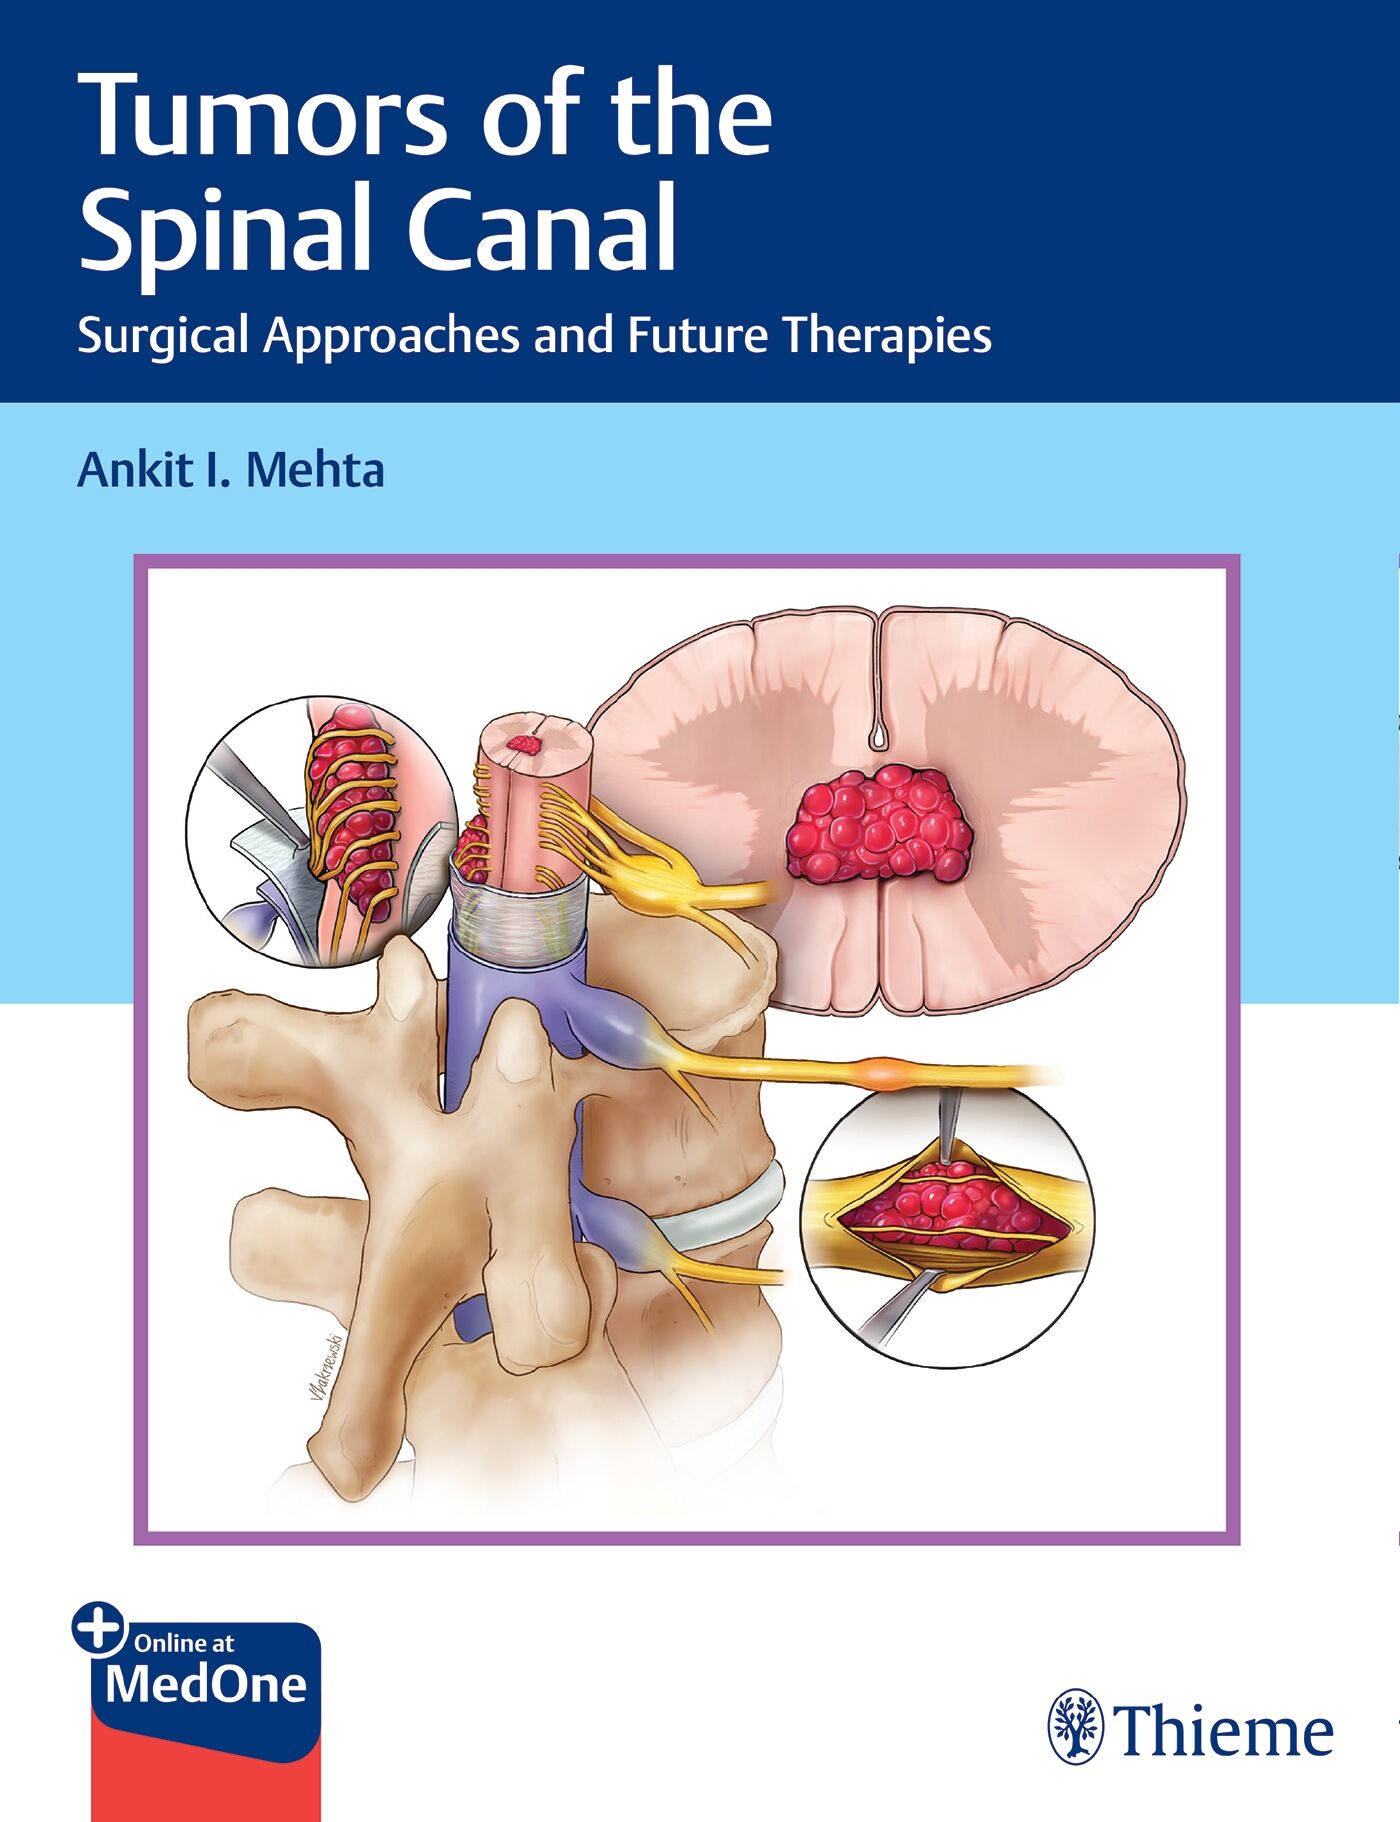 Tumors of the Spinal Canal, 9781626239326